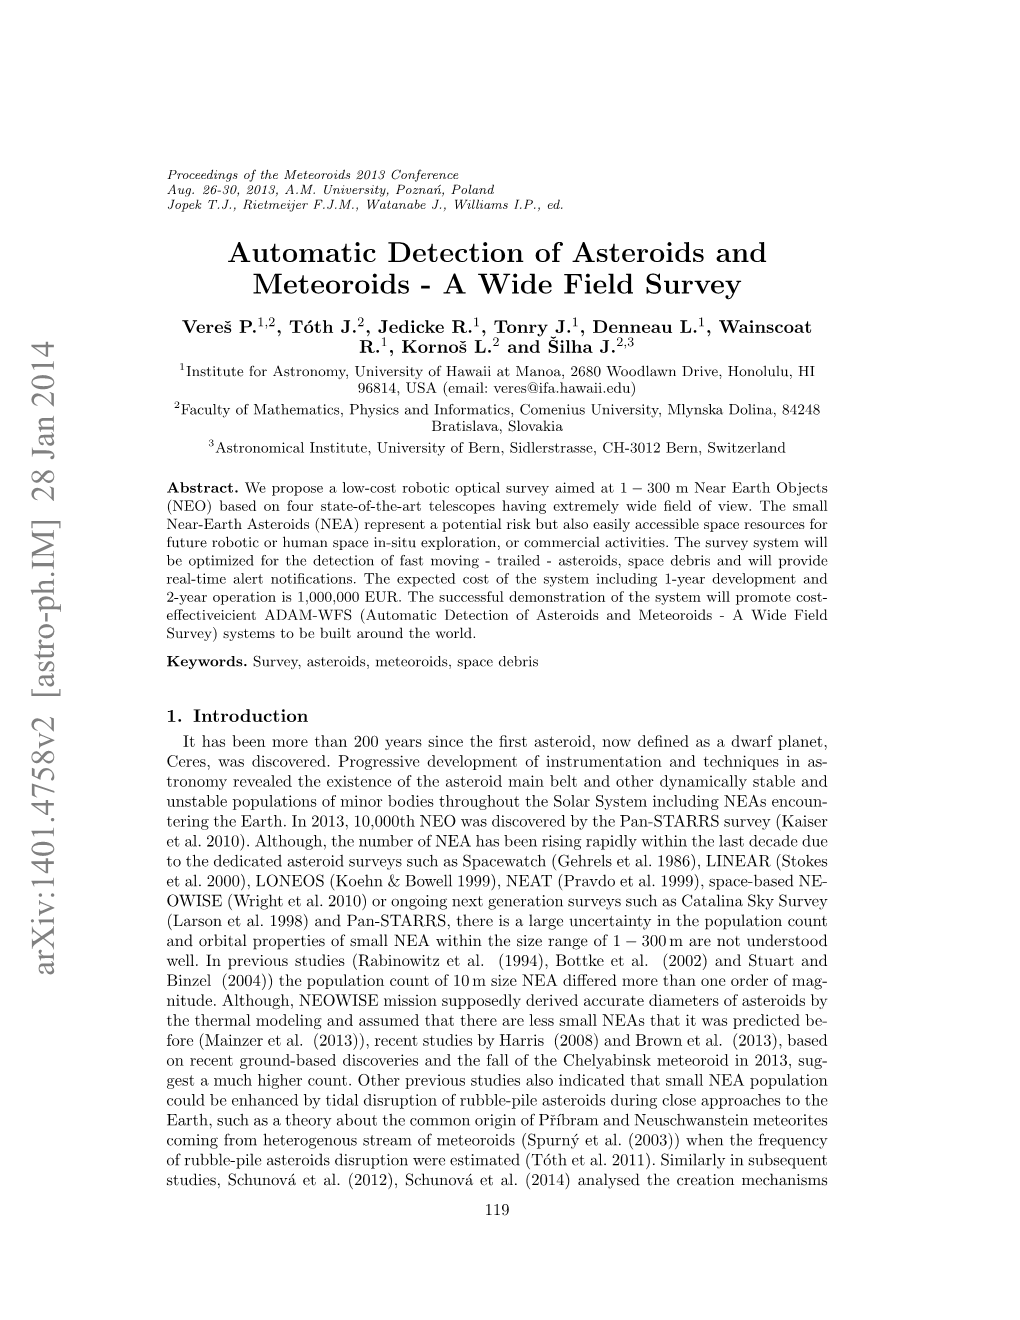 Automatic Detection of Asteroids and Meteoroids-A Wide Field Survey